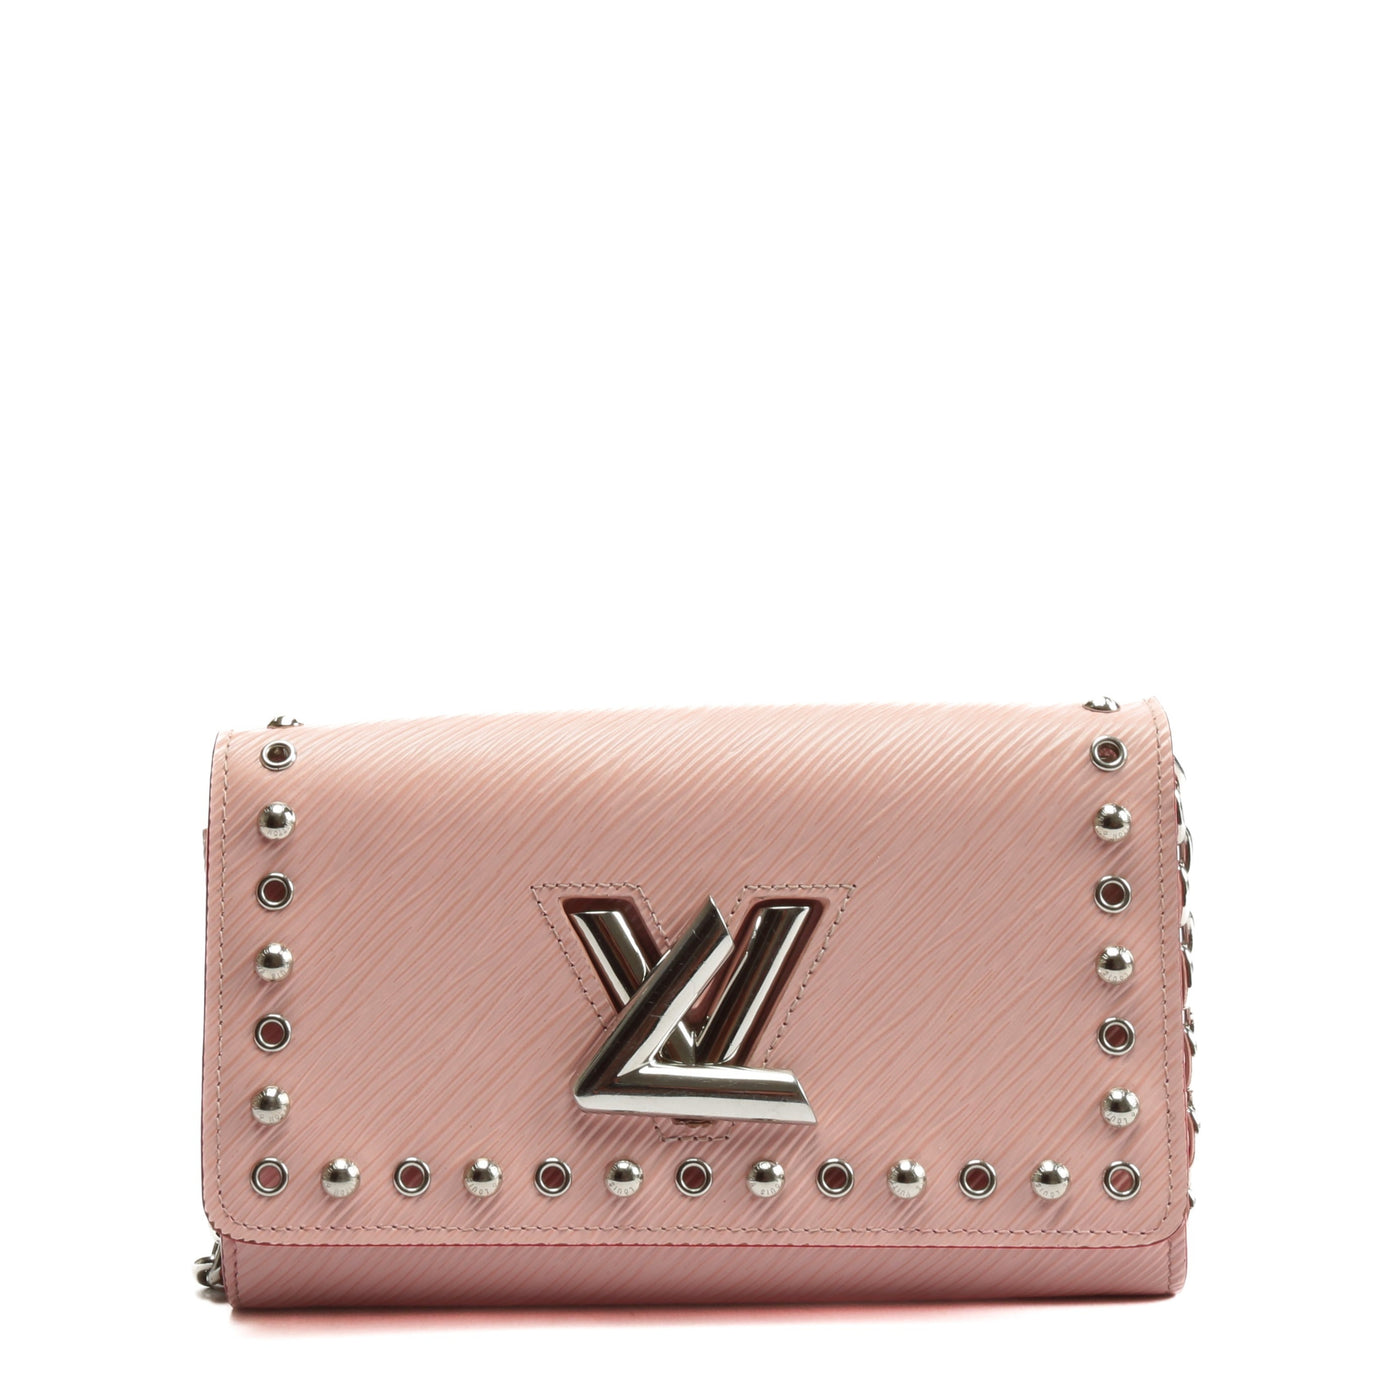 LOUIS VUITTON Epi Leather Twist Studded Wallet on Chain PM Pink